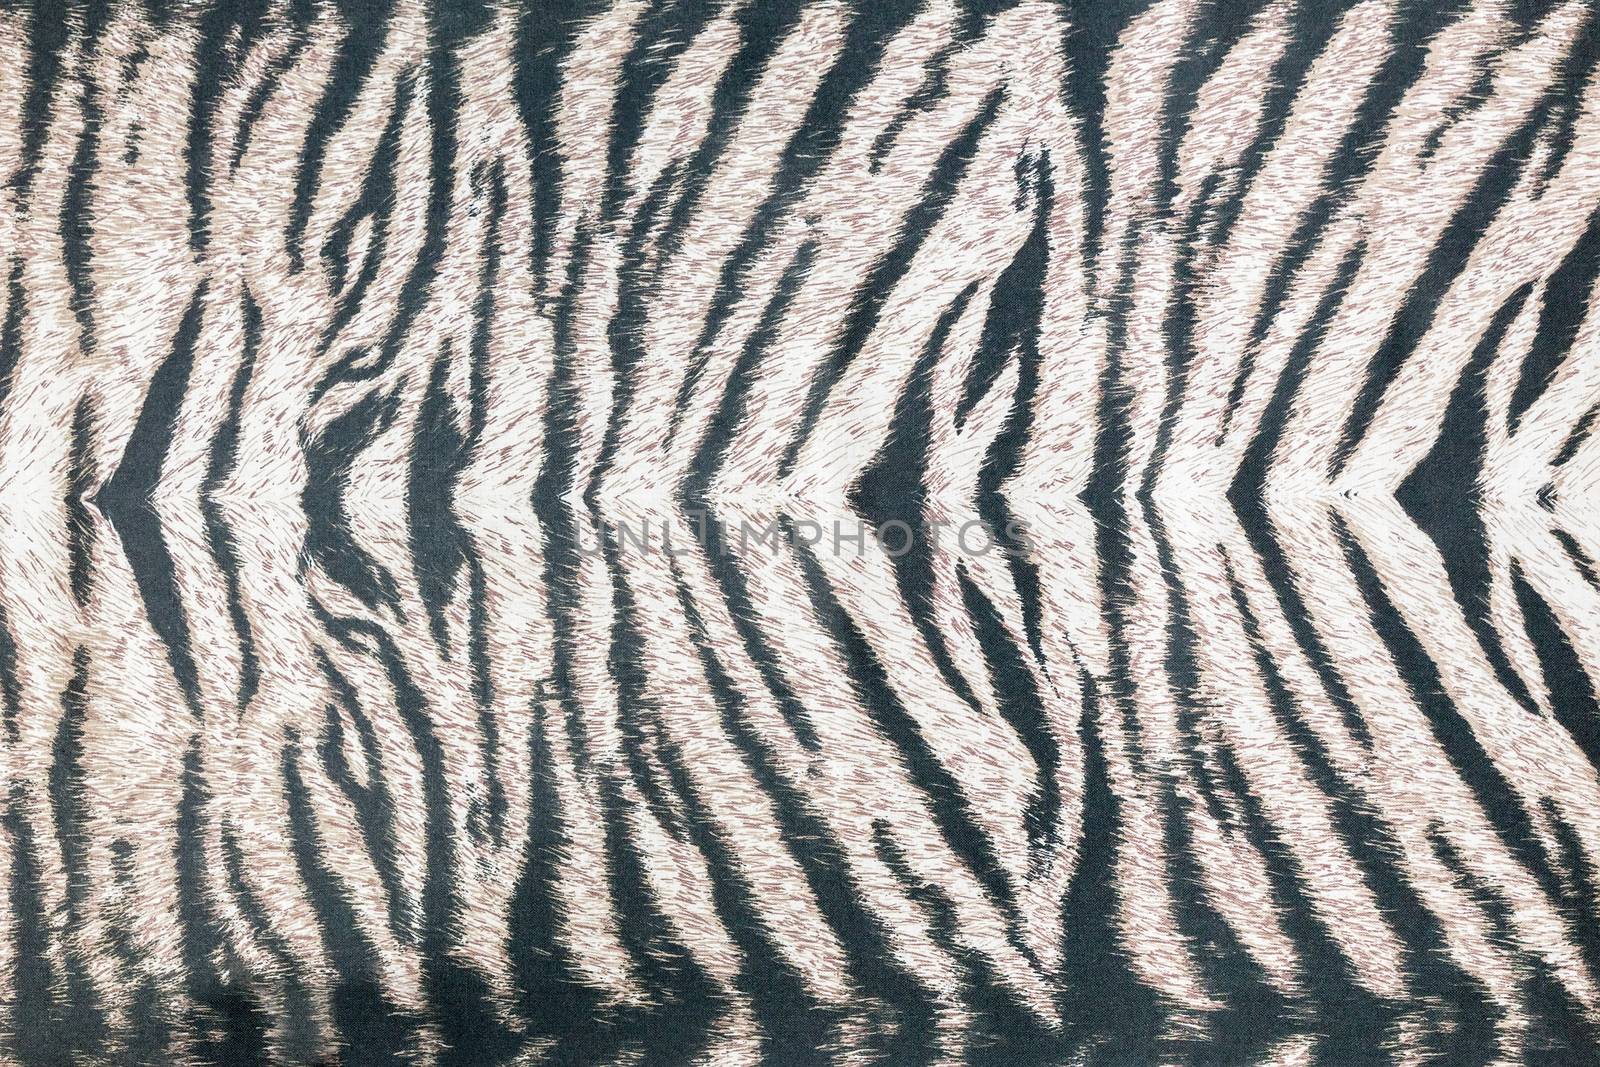 Background of striped animal fur print by BenSchonewille